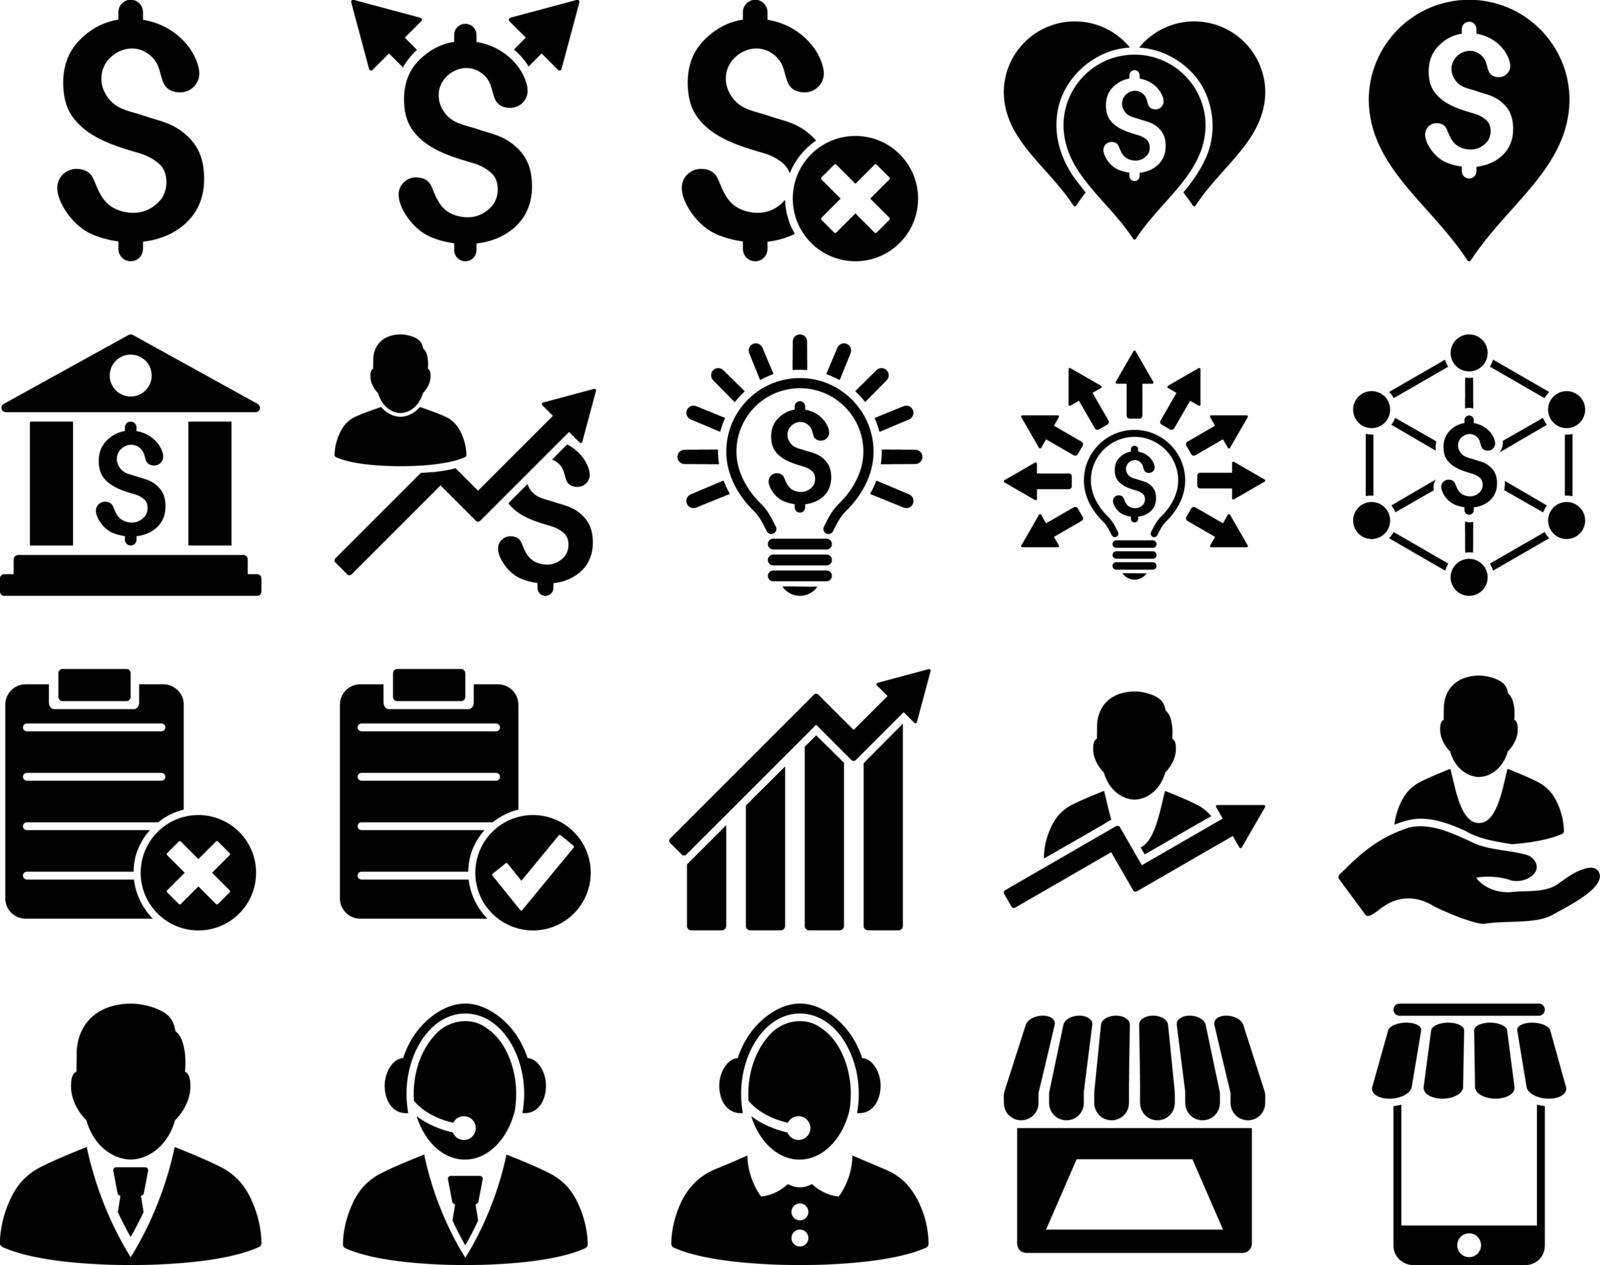 Trade business and bank service icon set. These flat icons use black color. Images are isolated on a white background. Angles are rounded.